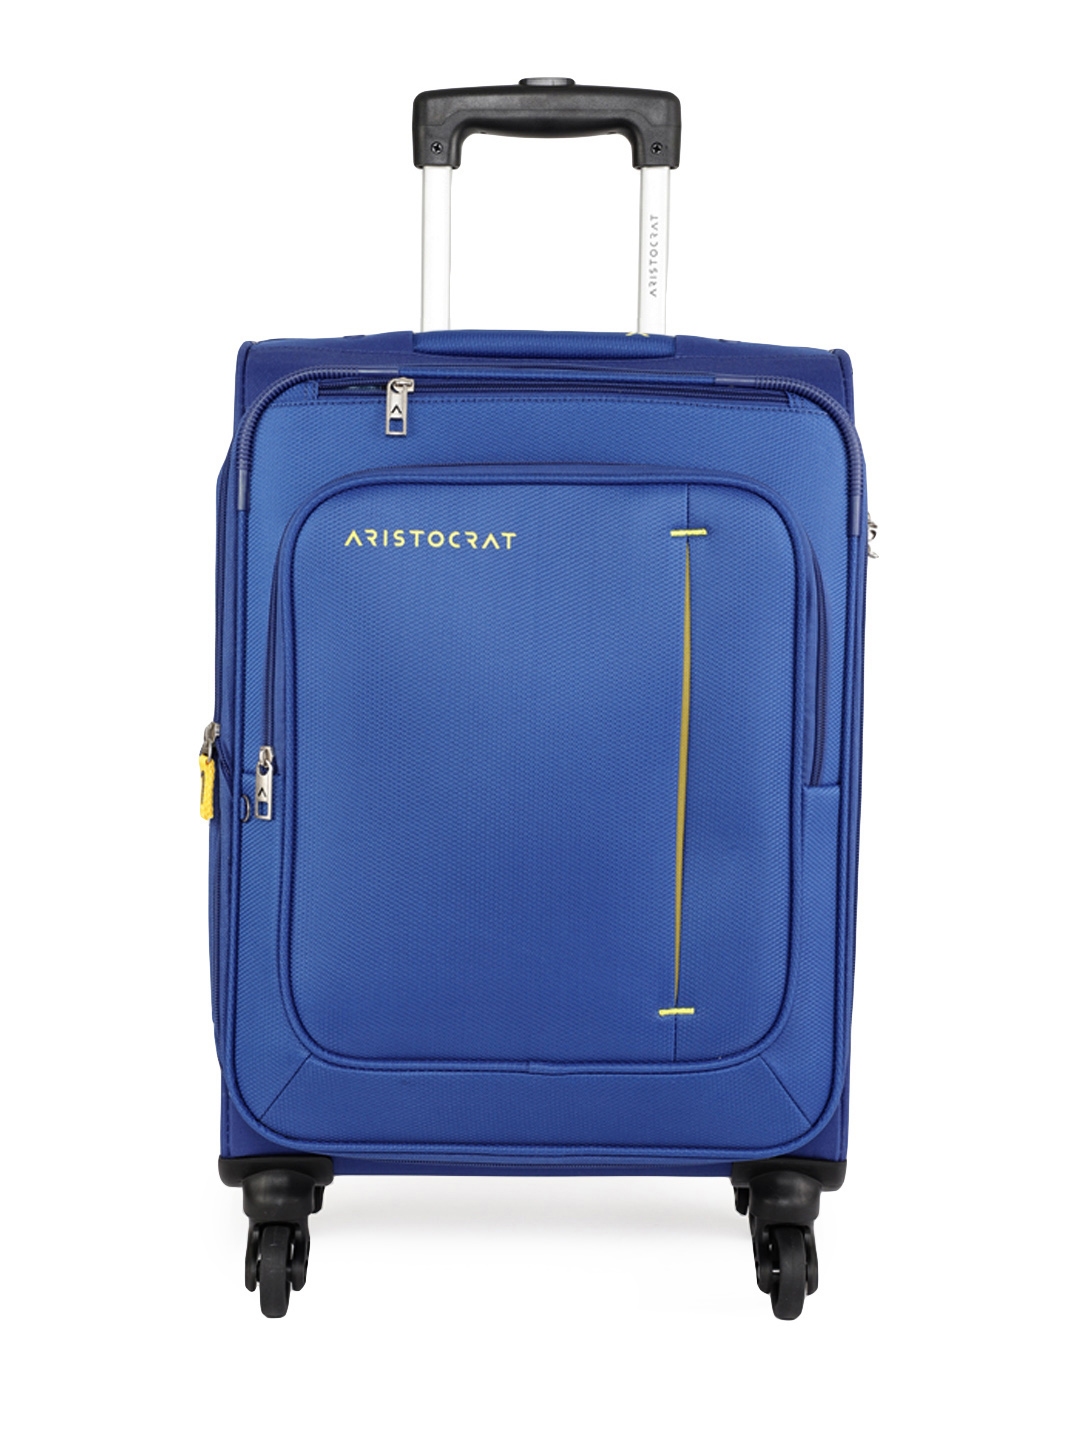 ARISTOCRAT FORESTER STROLLY 67 360°(ARISTO) MGP Expandable Check-in Suitcase  - 26 inch Purple - Price in India | Flipkart.com